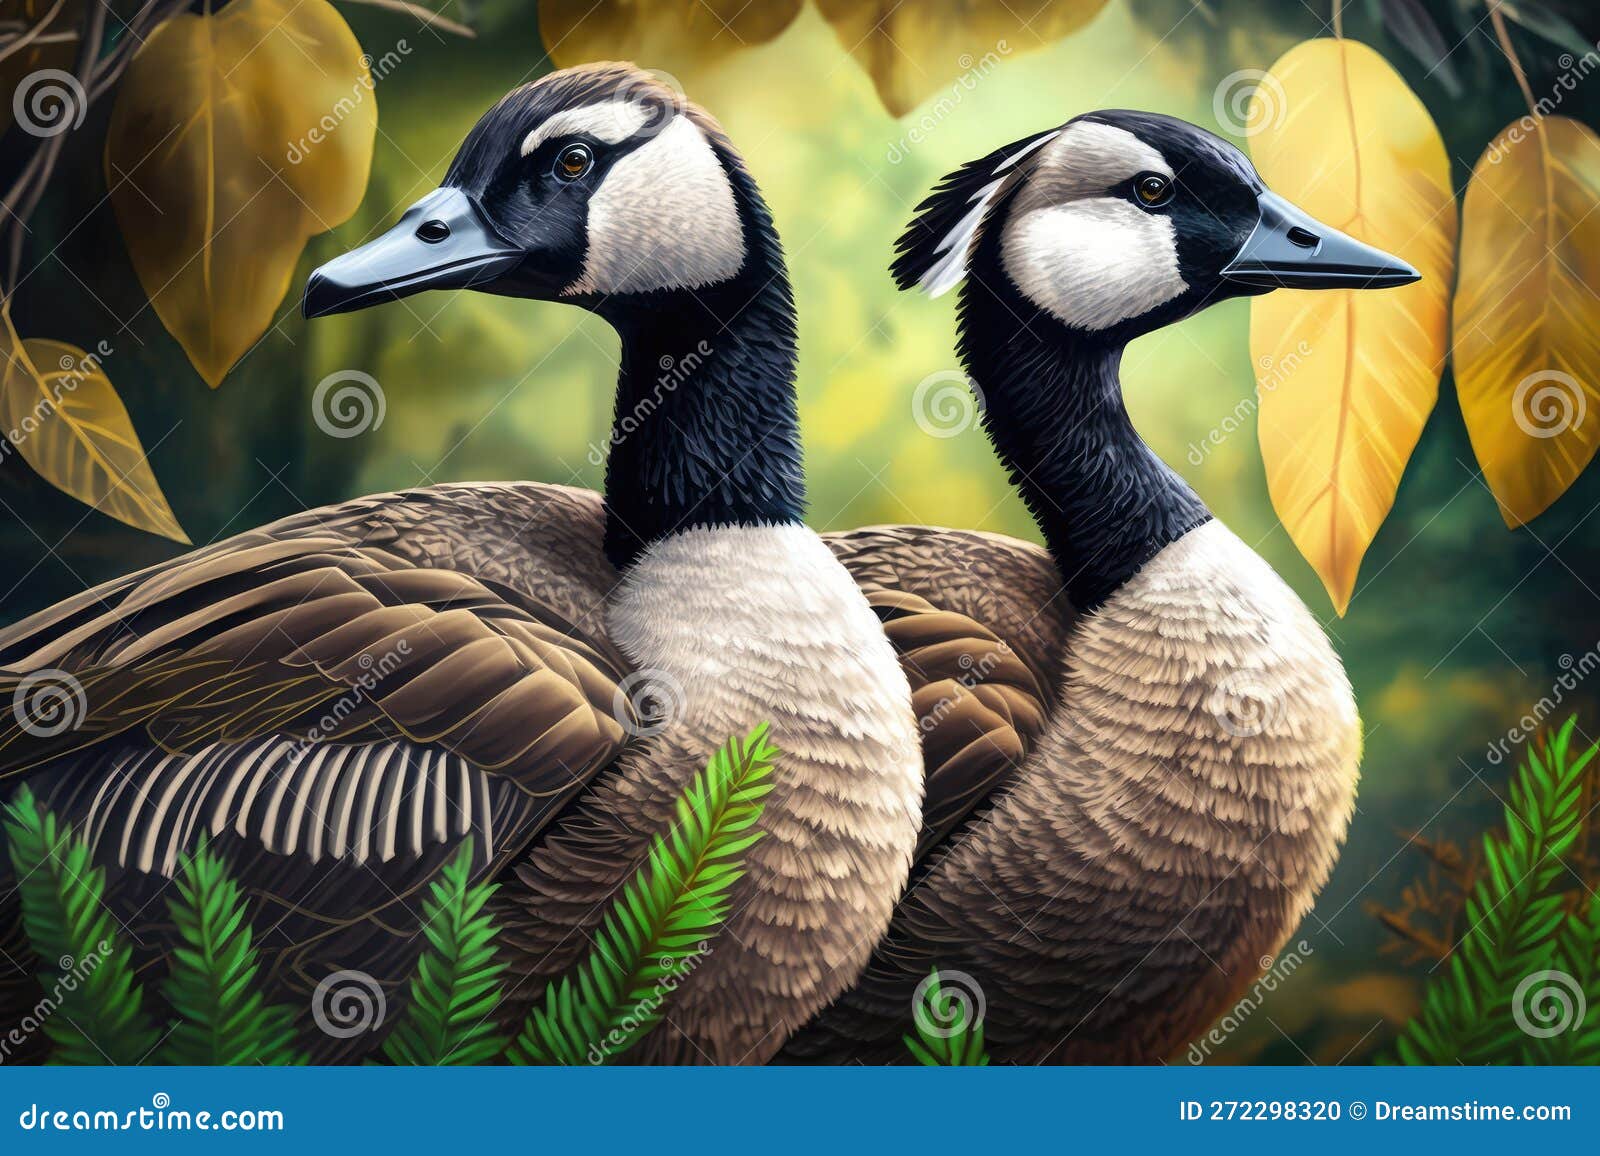 Design of Two Colorful Canada Goose Bird in the Jungle. Stock